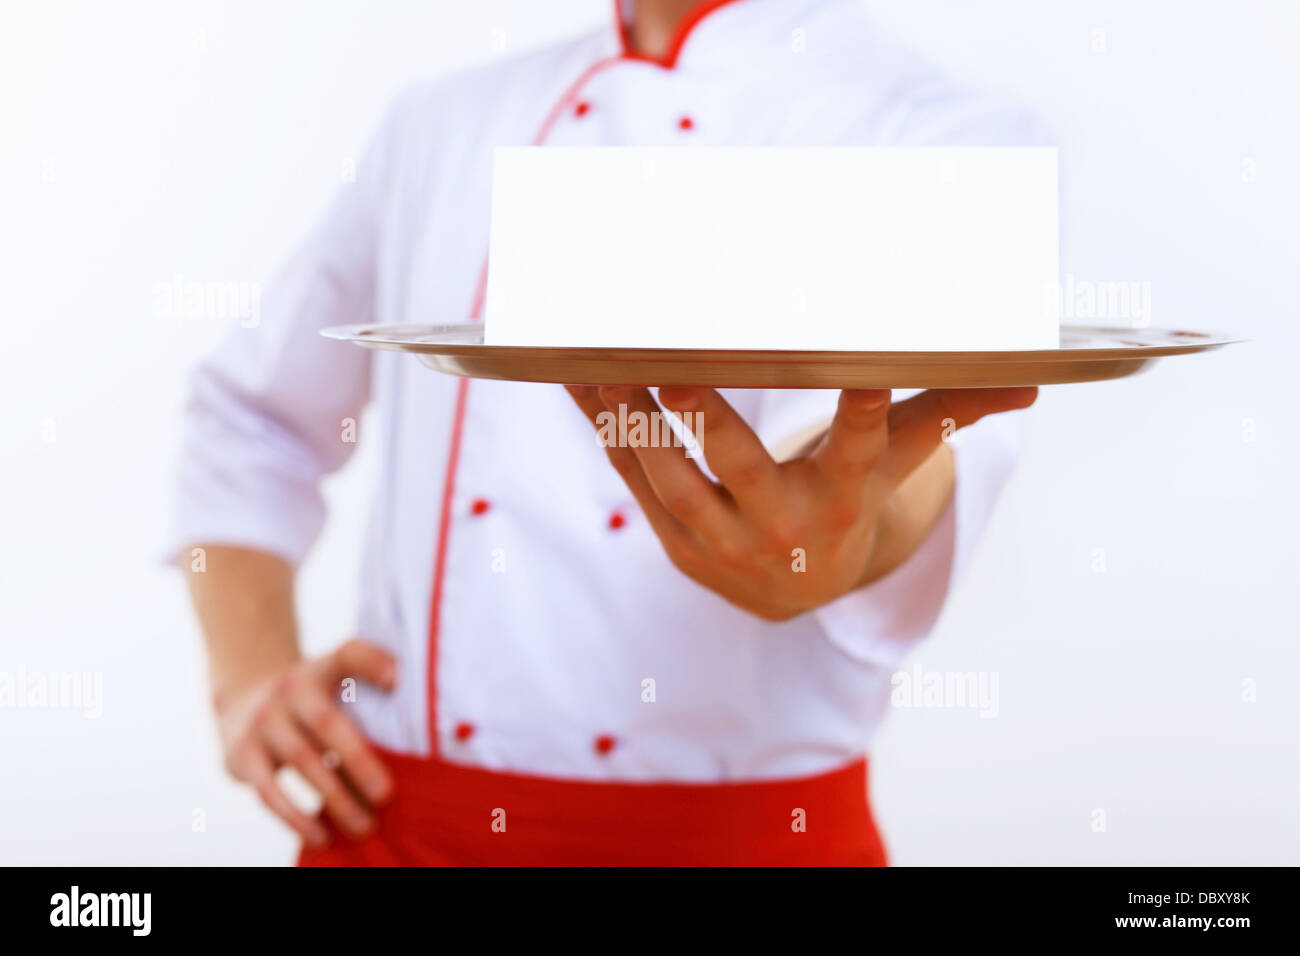 Cook holding an empty tray Stock Photo